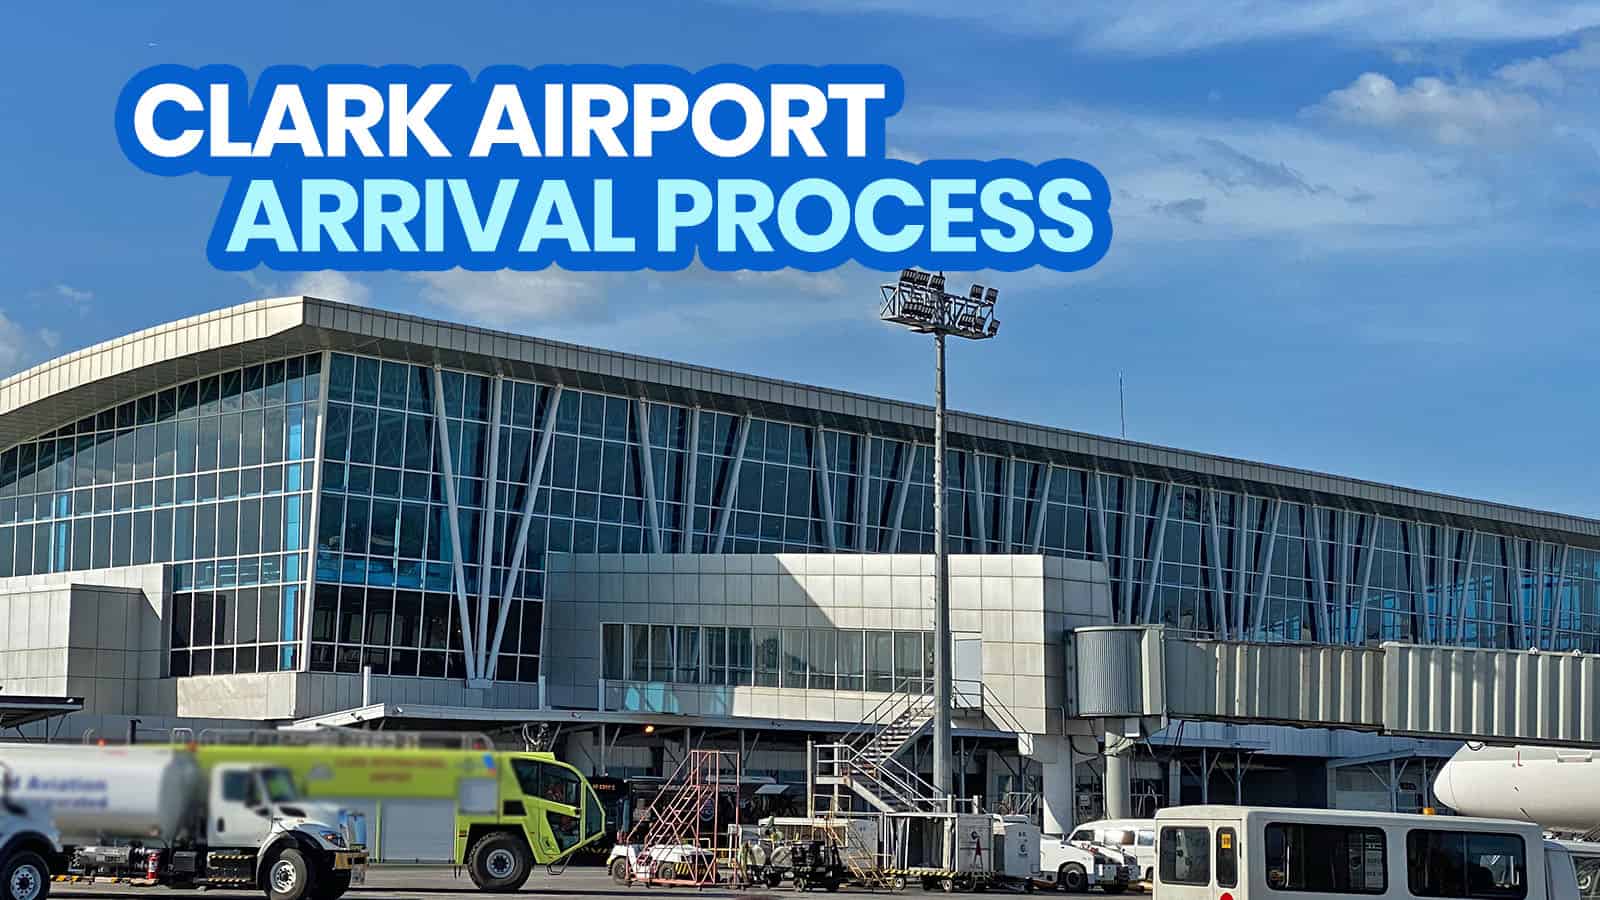 CLARK AIRPORT International Arrival Process & Requirements (OFWs, Non-OFWs, Foreigners)